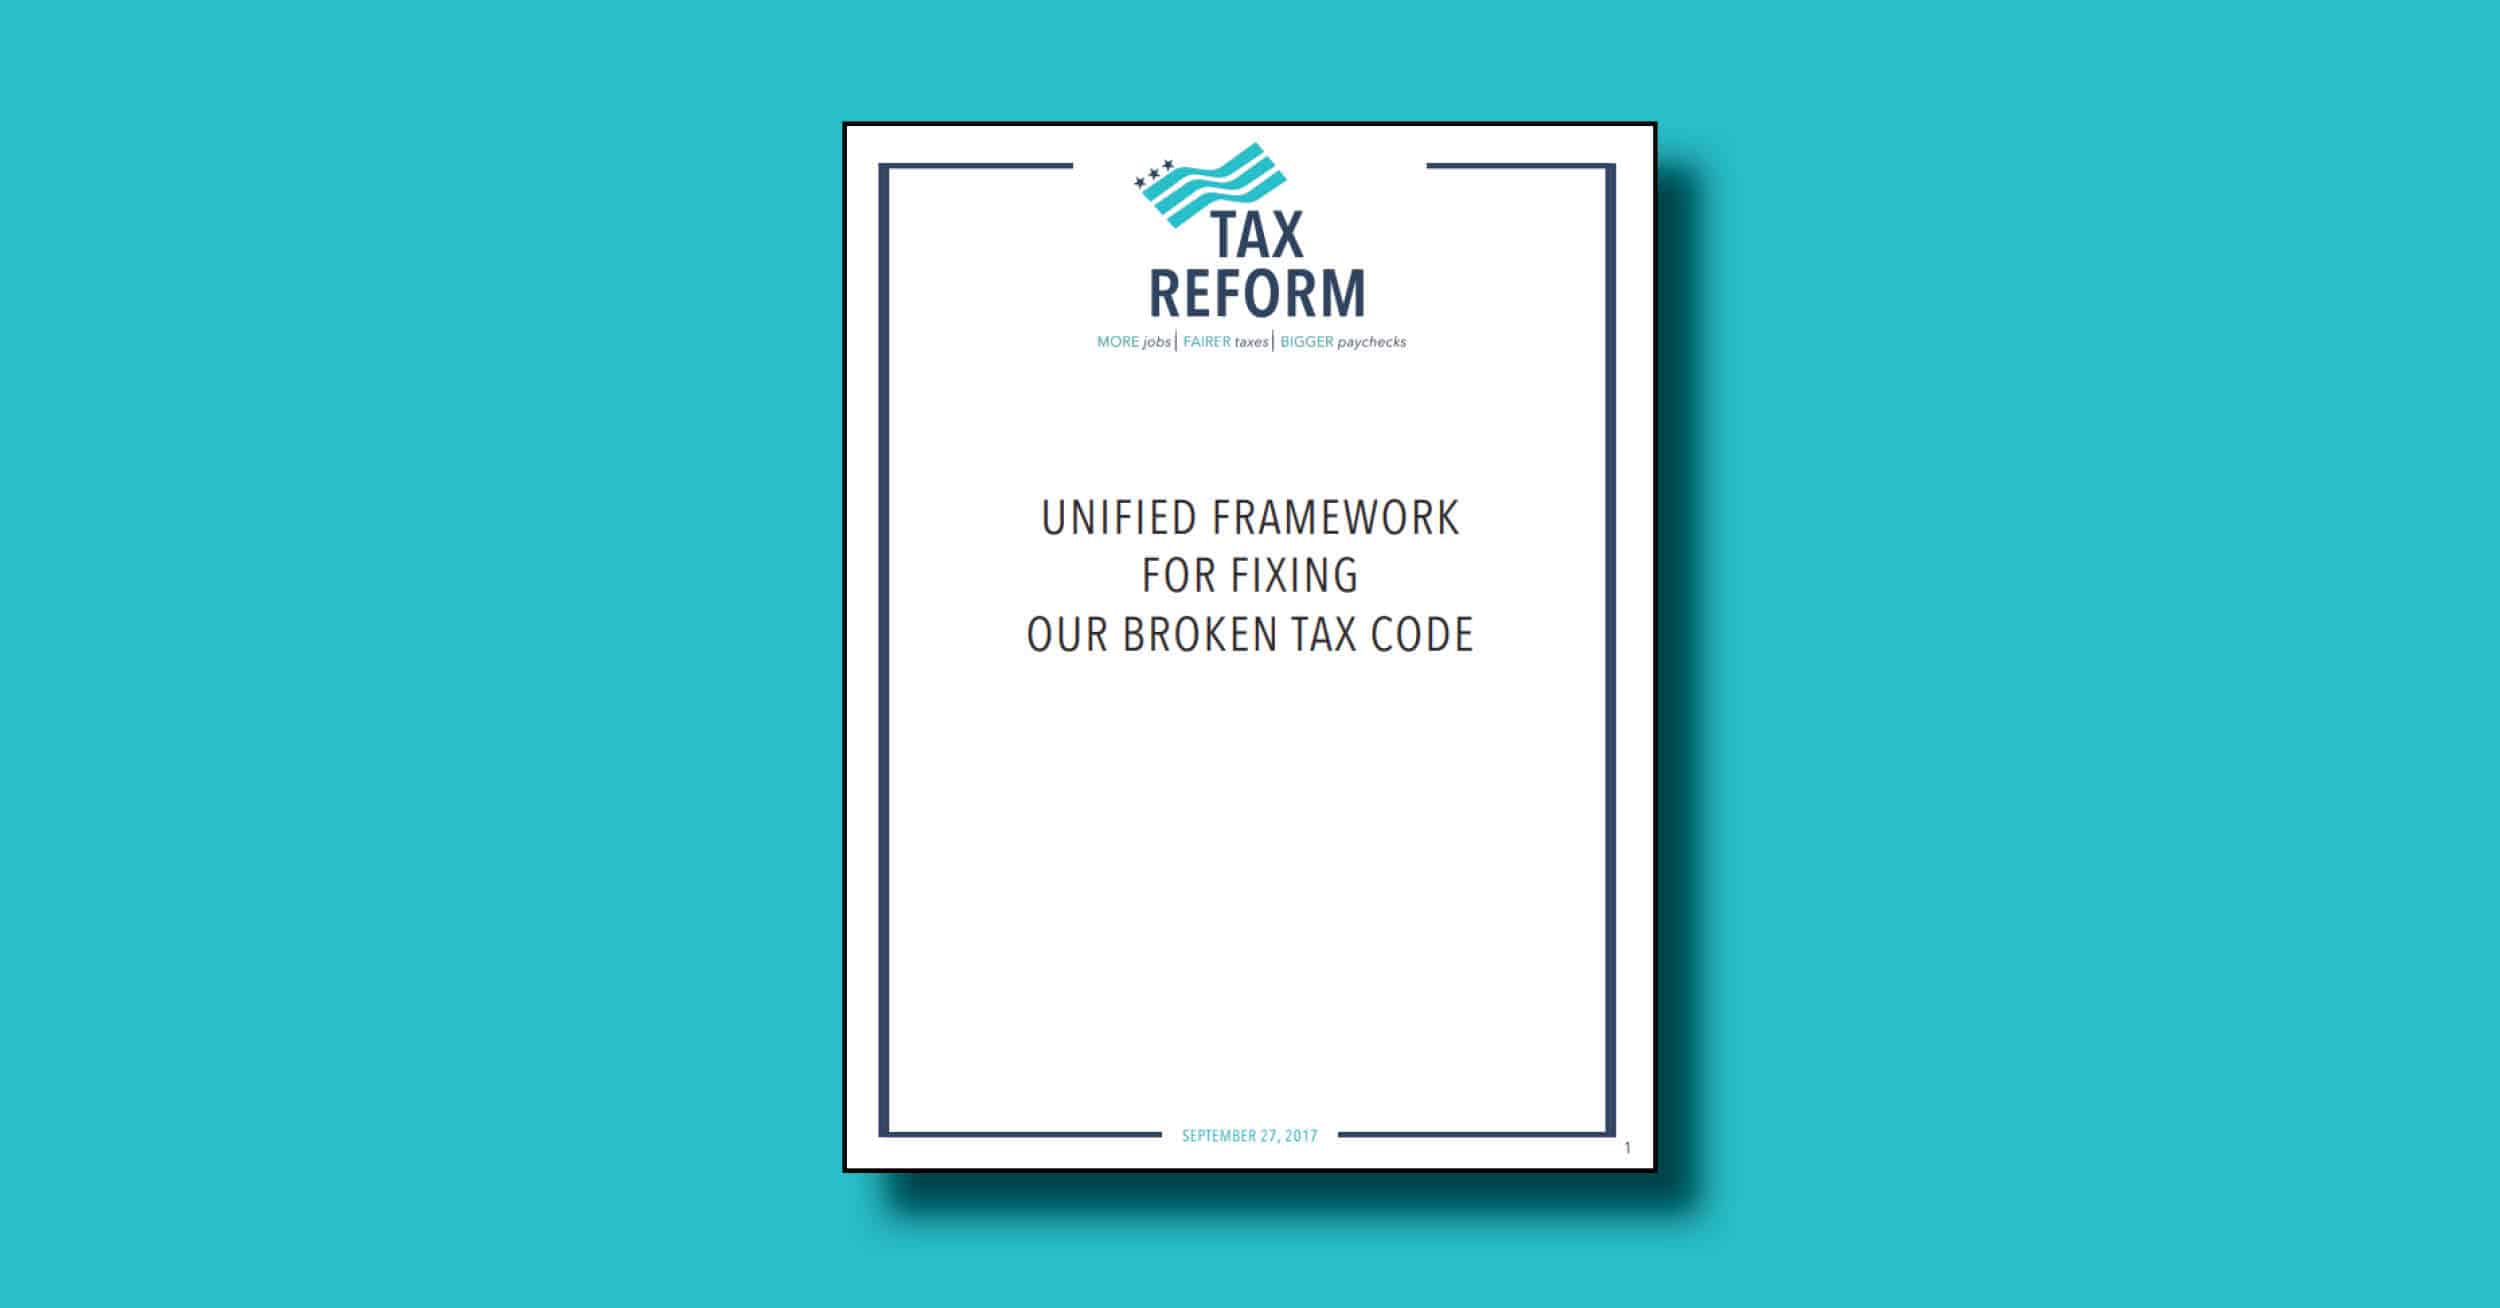 Statement Regarding the 'Unified Framework For Fixing Our Broken Tax Code'